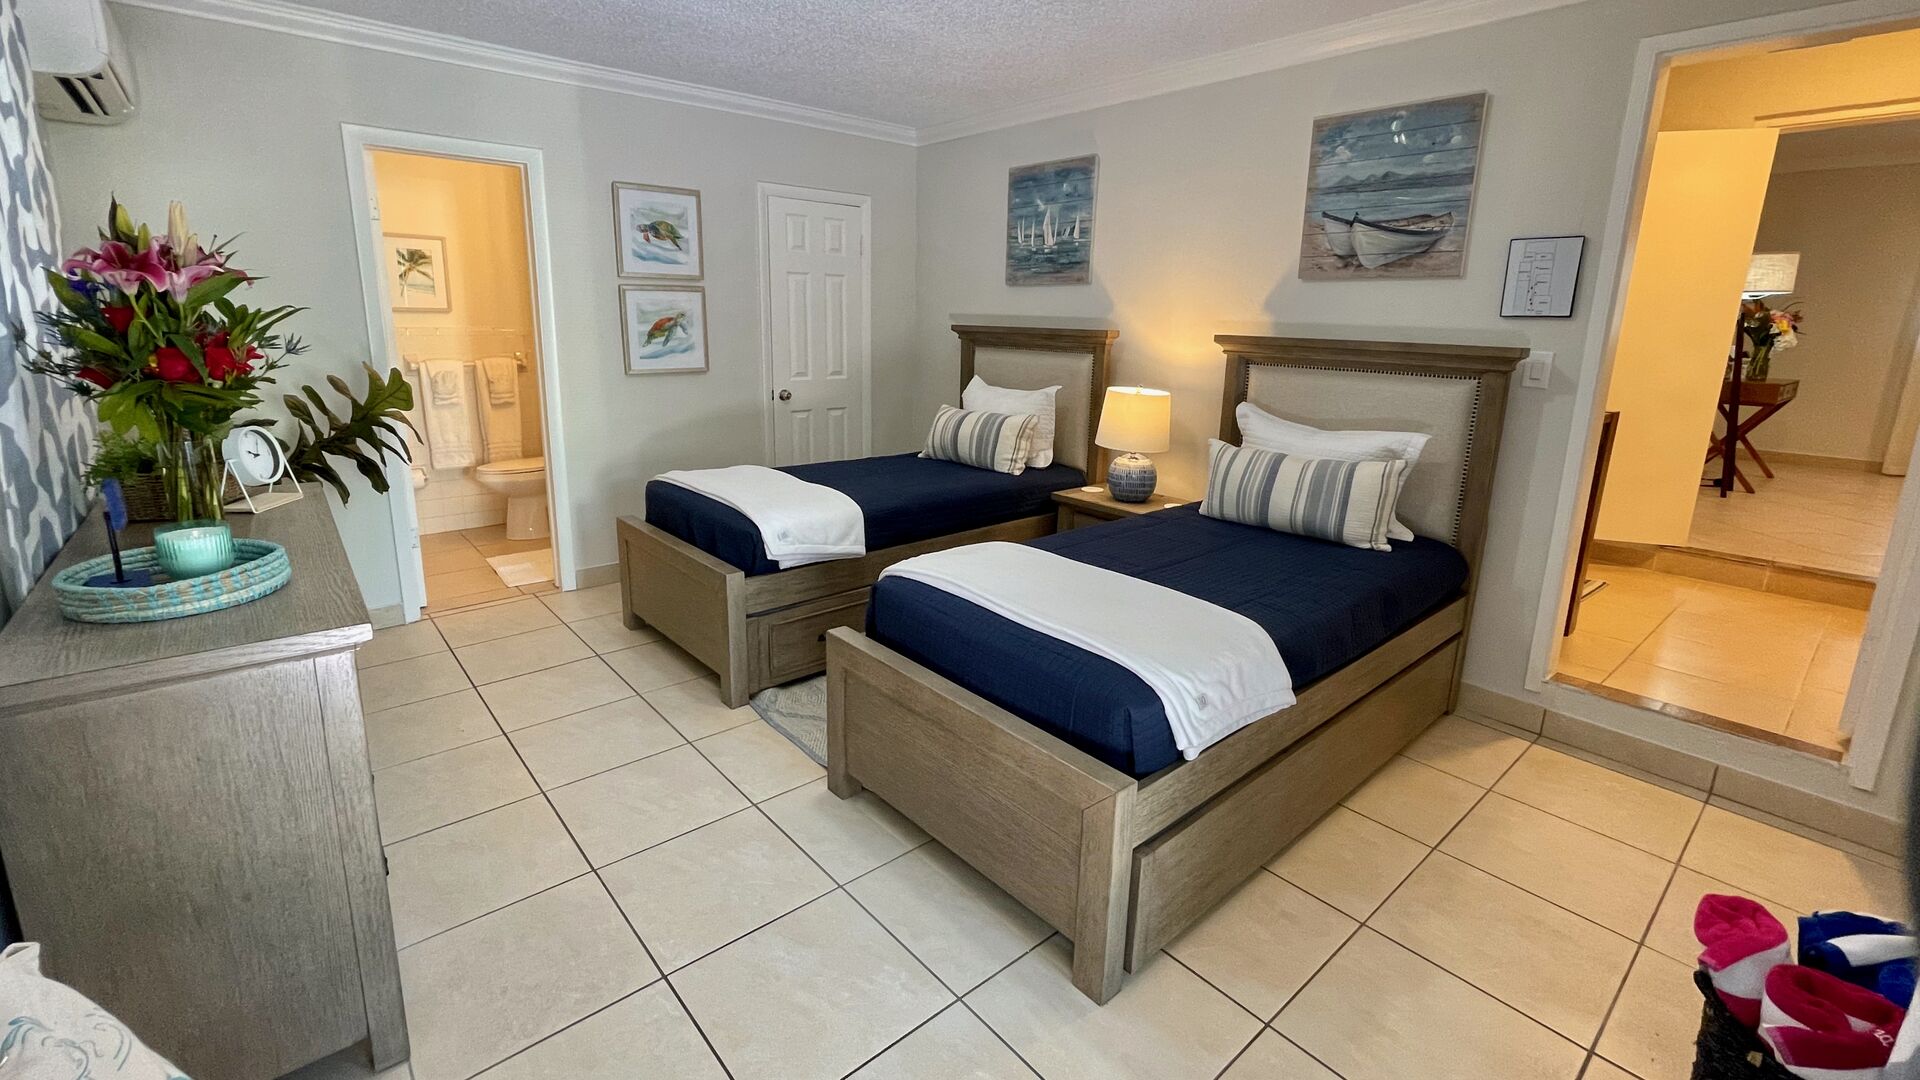 The third bedroom features two twin-sized beds and a Smart TV, too. It also has access to its own full en suite bathroom!